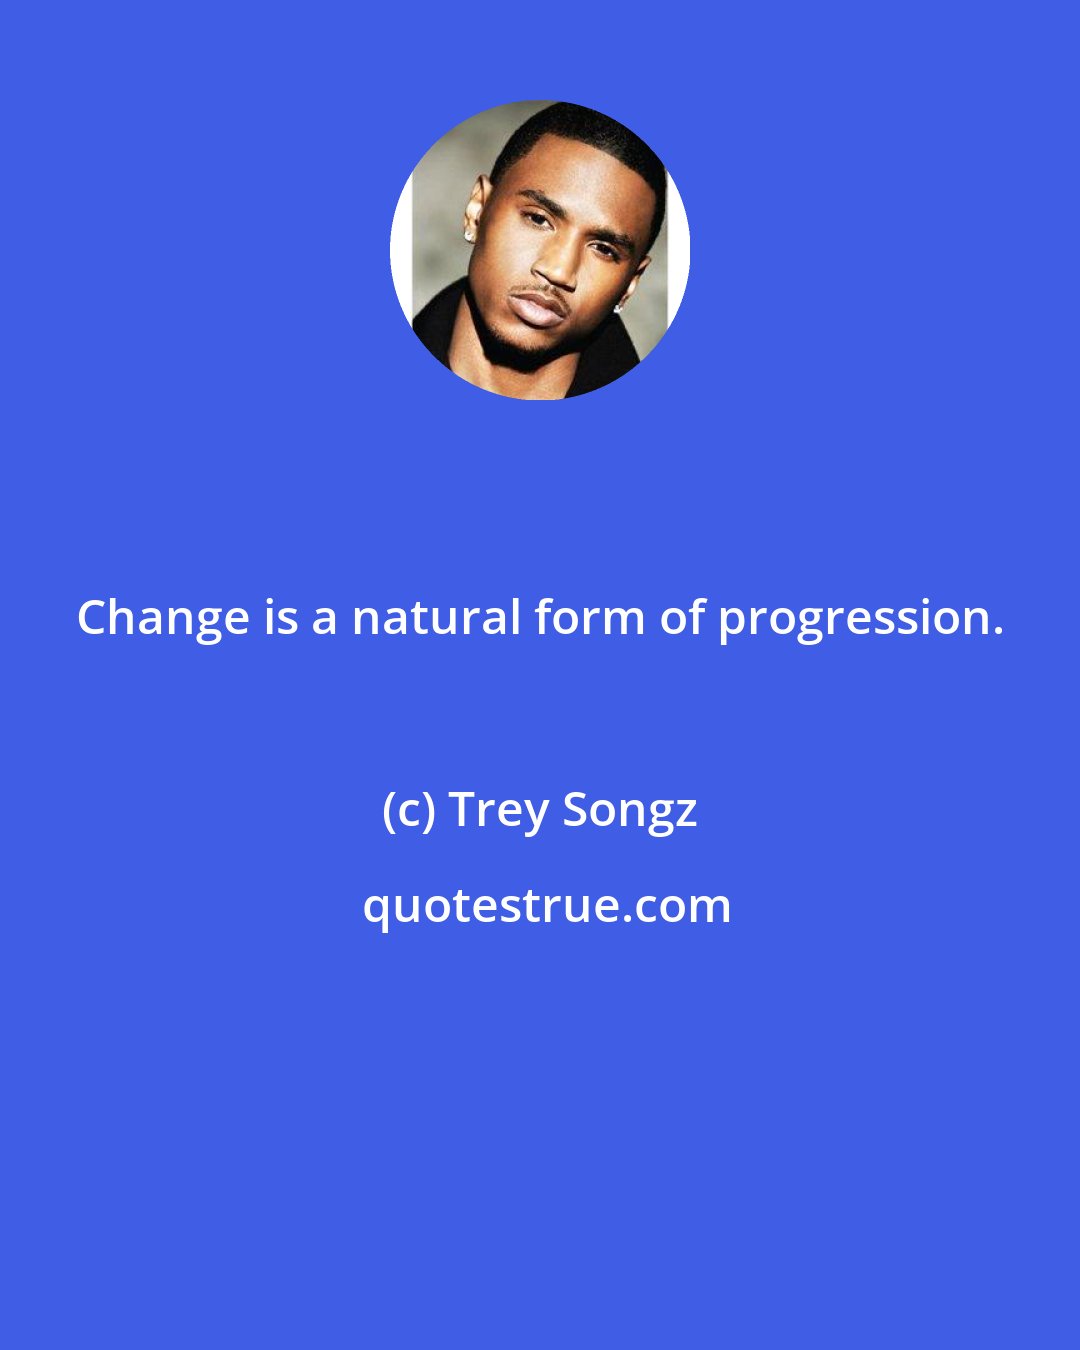 Trey Songz: Change is a natural form of progression.